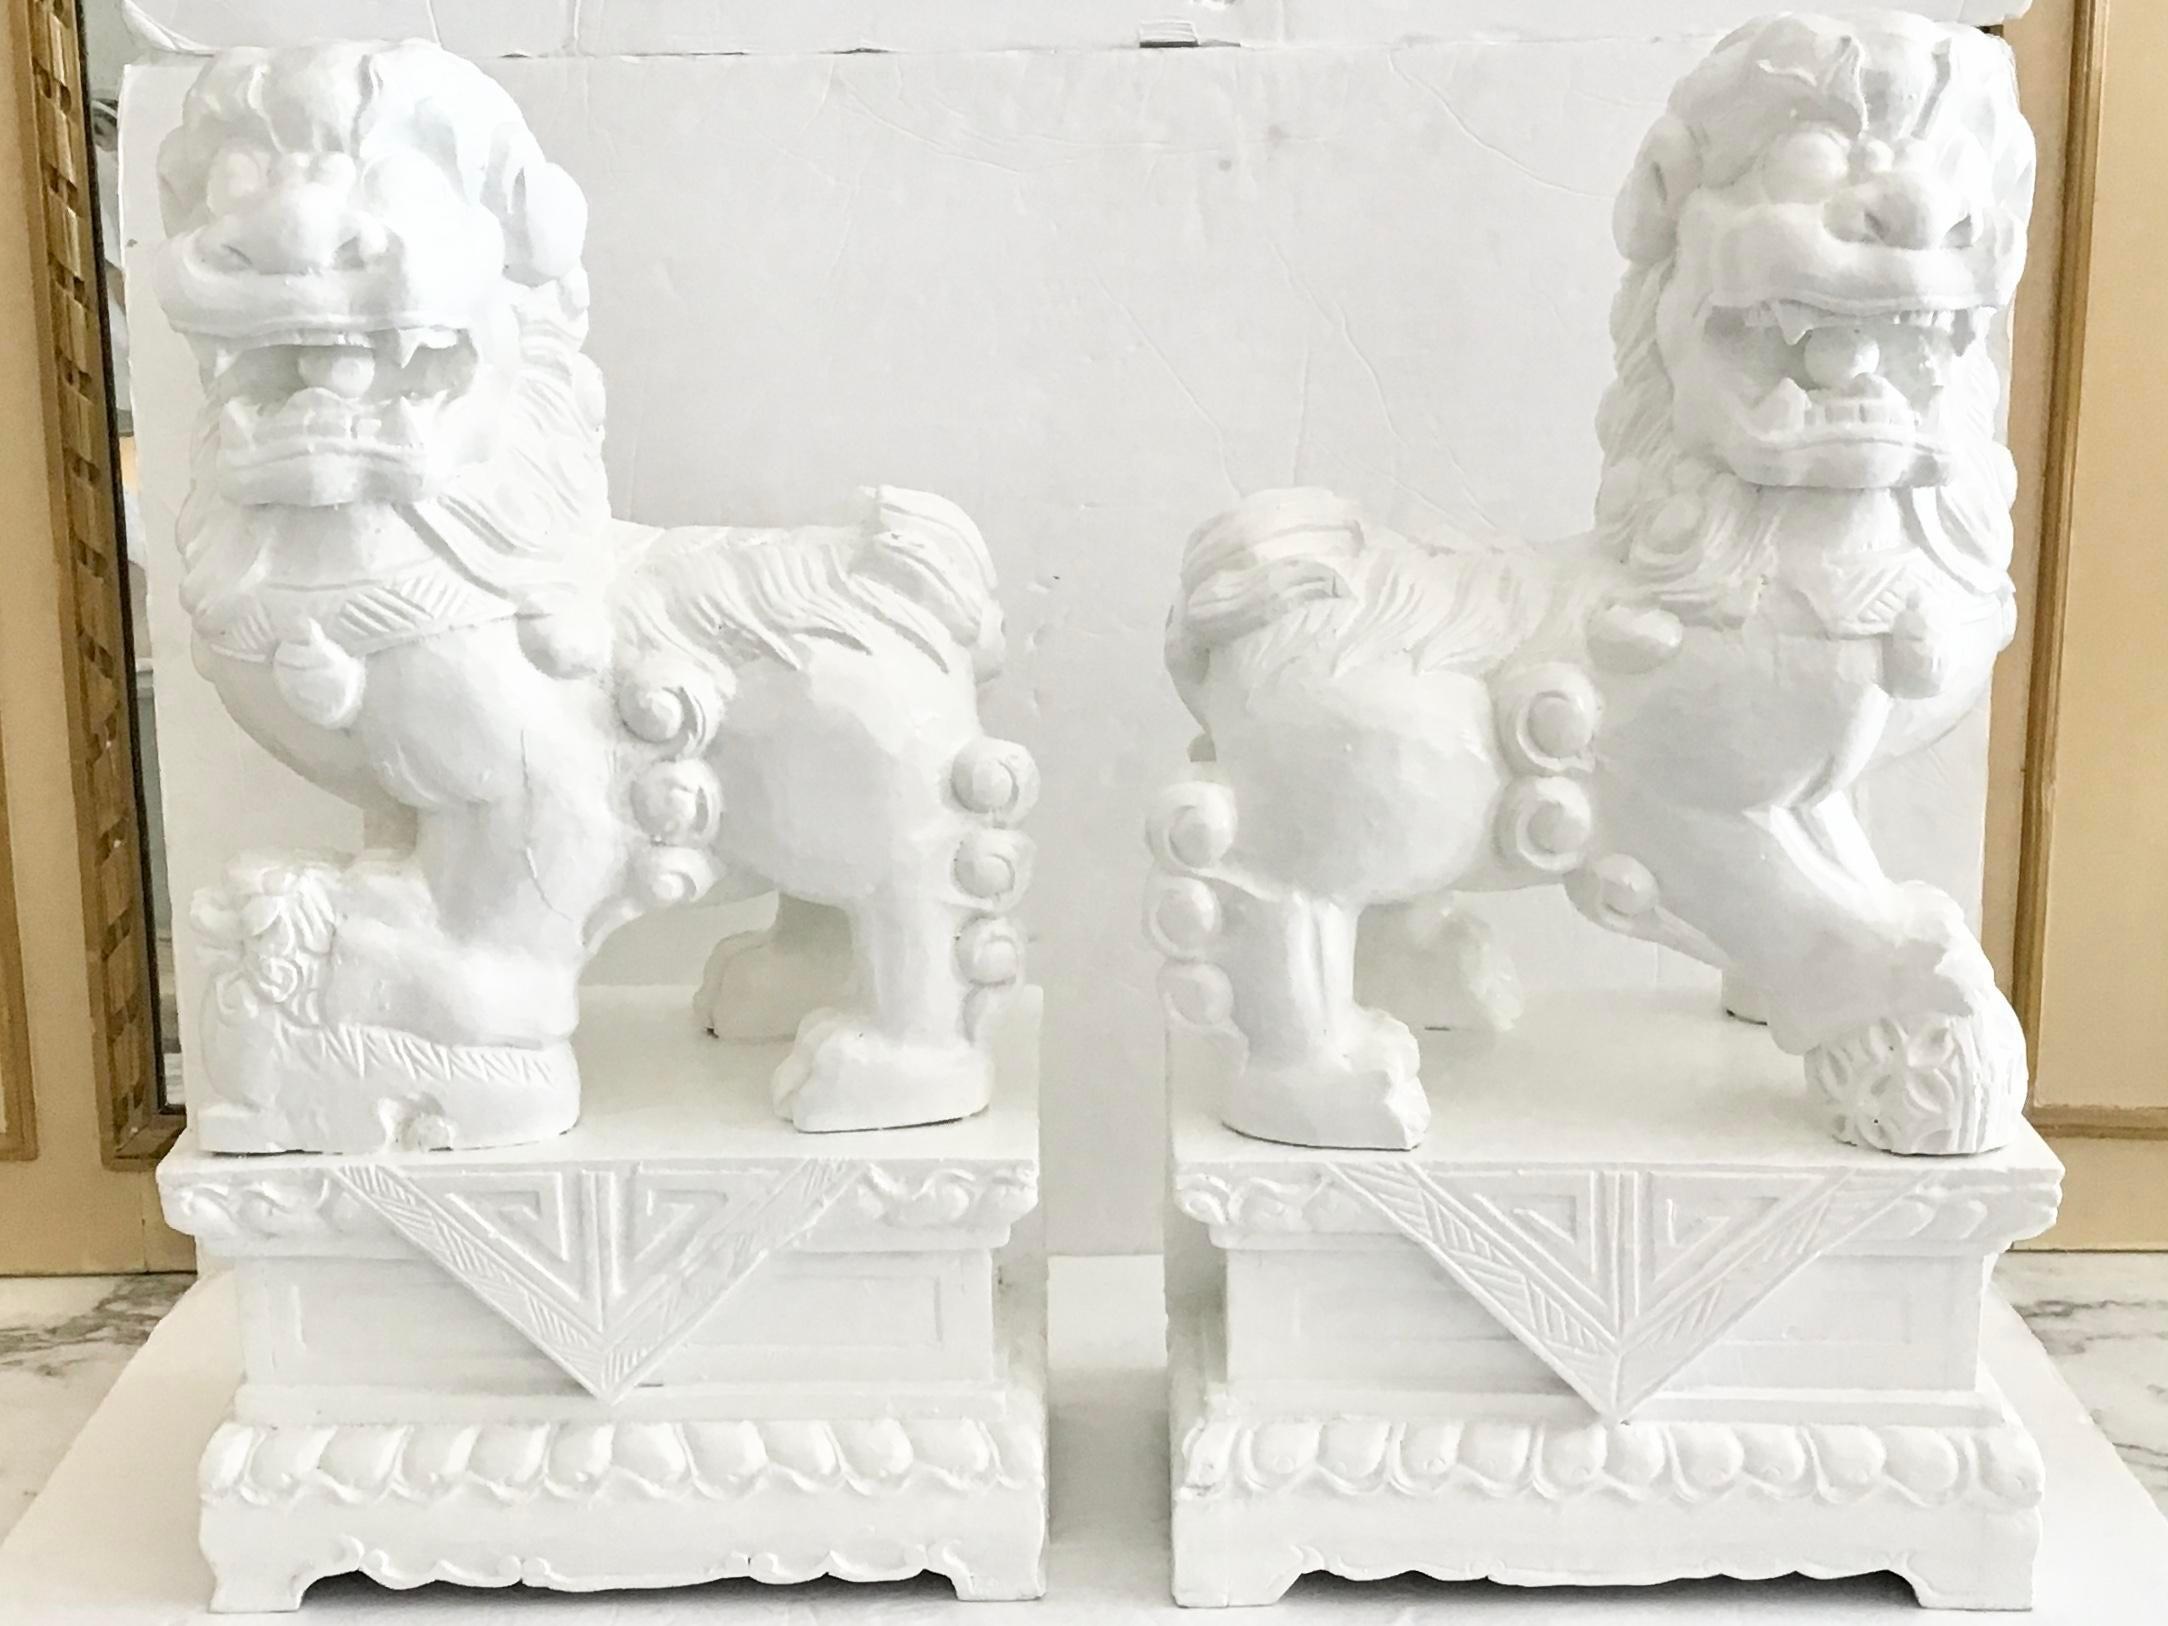 Pair of freshly lacquered in white fantastic large foo dogs made of wood. The geometrical carving details at the base is amazing. Add it to your collection of Asian art.